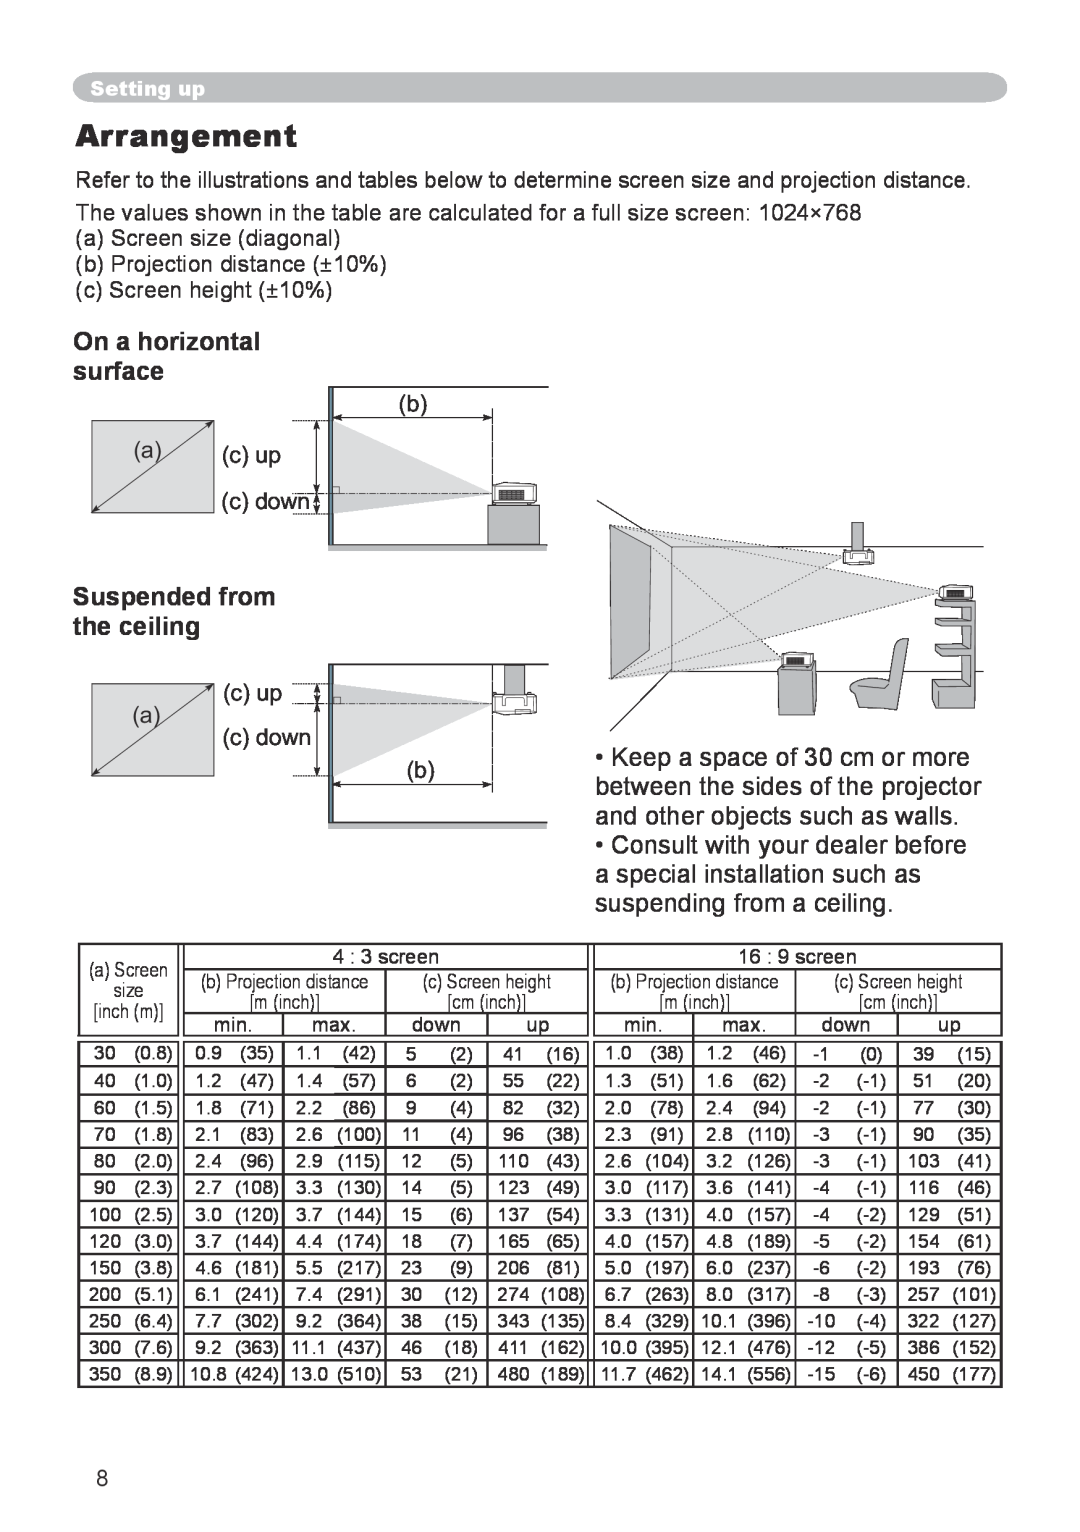 Hitachi CP-X600 user manual Arrangement, On a horizontal surface, Suspended from the ceiling 